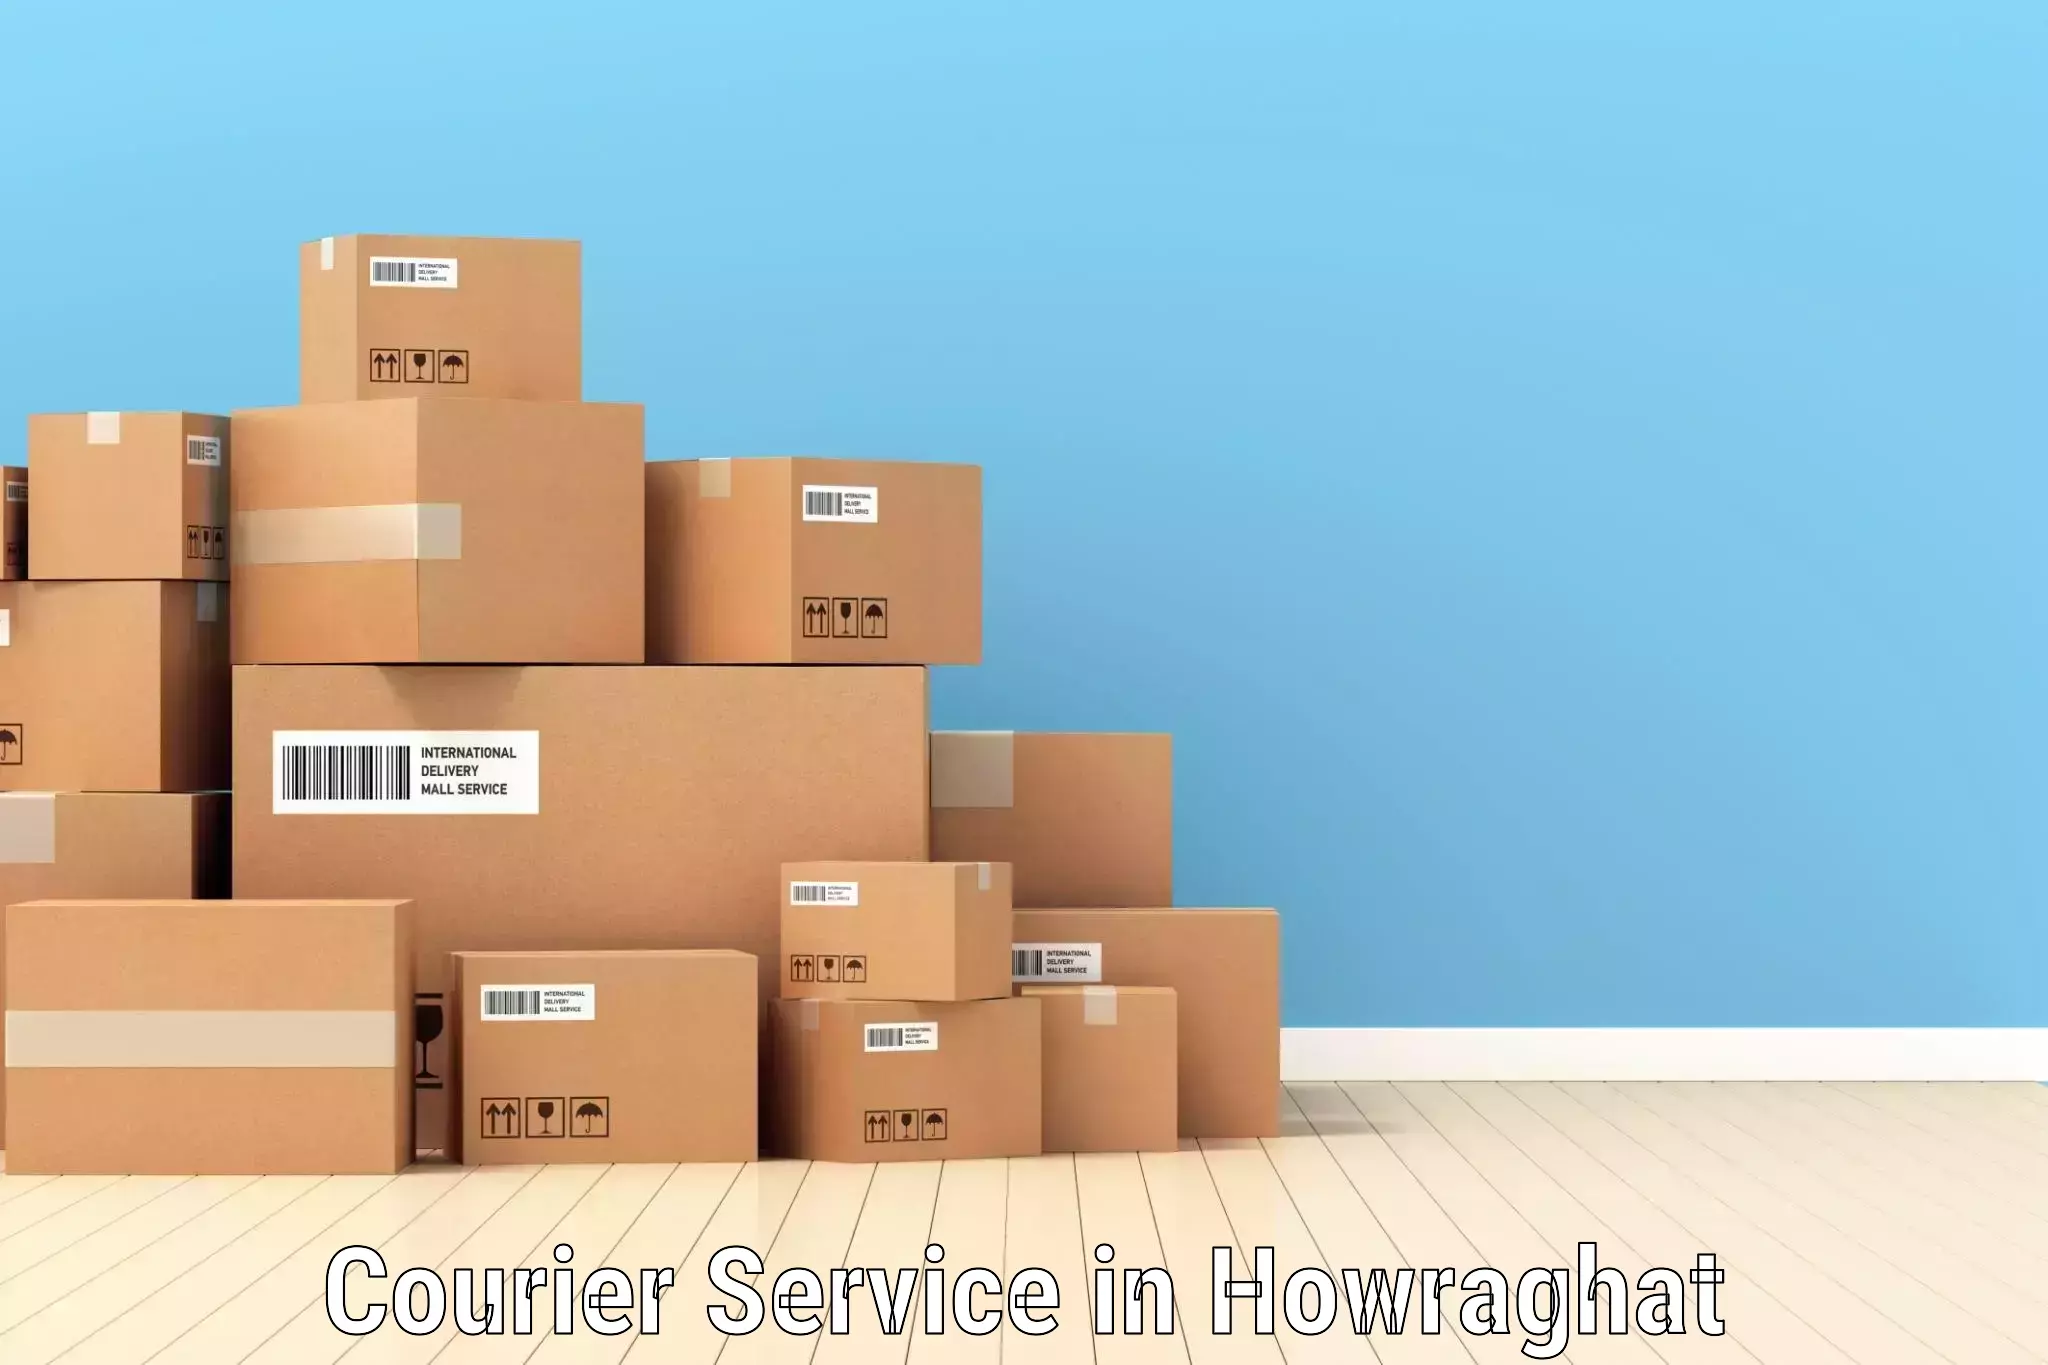 Courier insurance in Howraghat